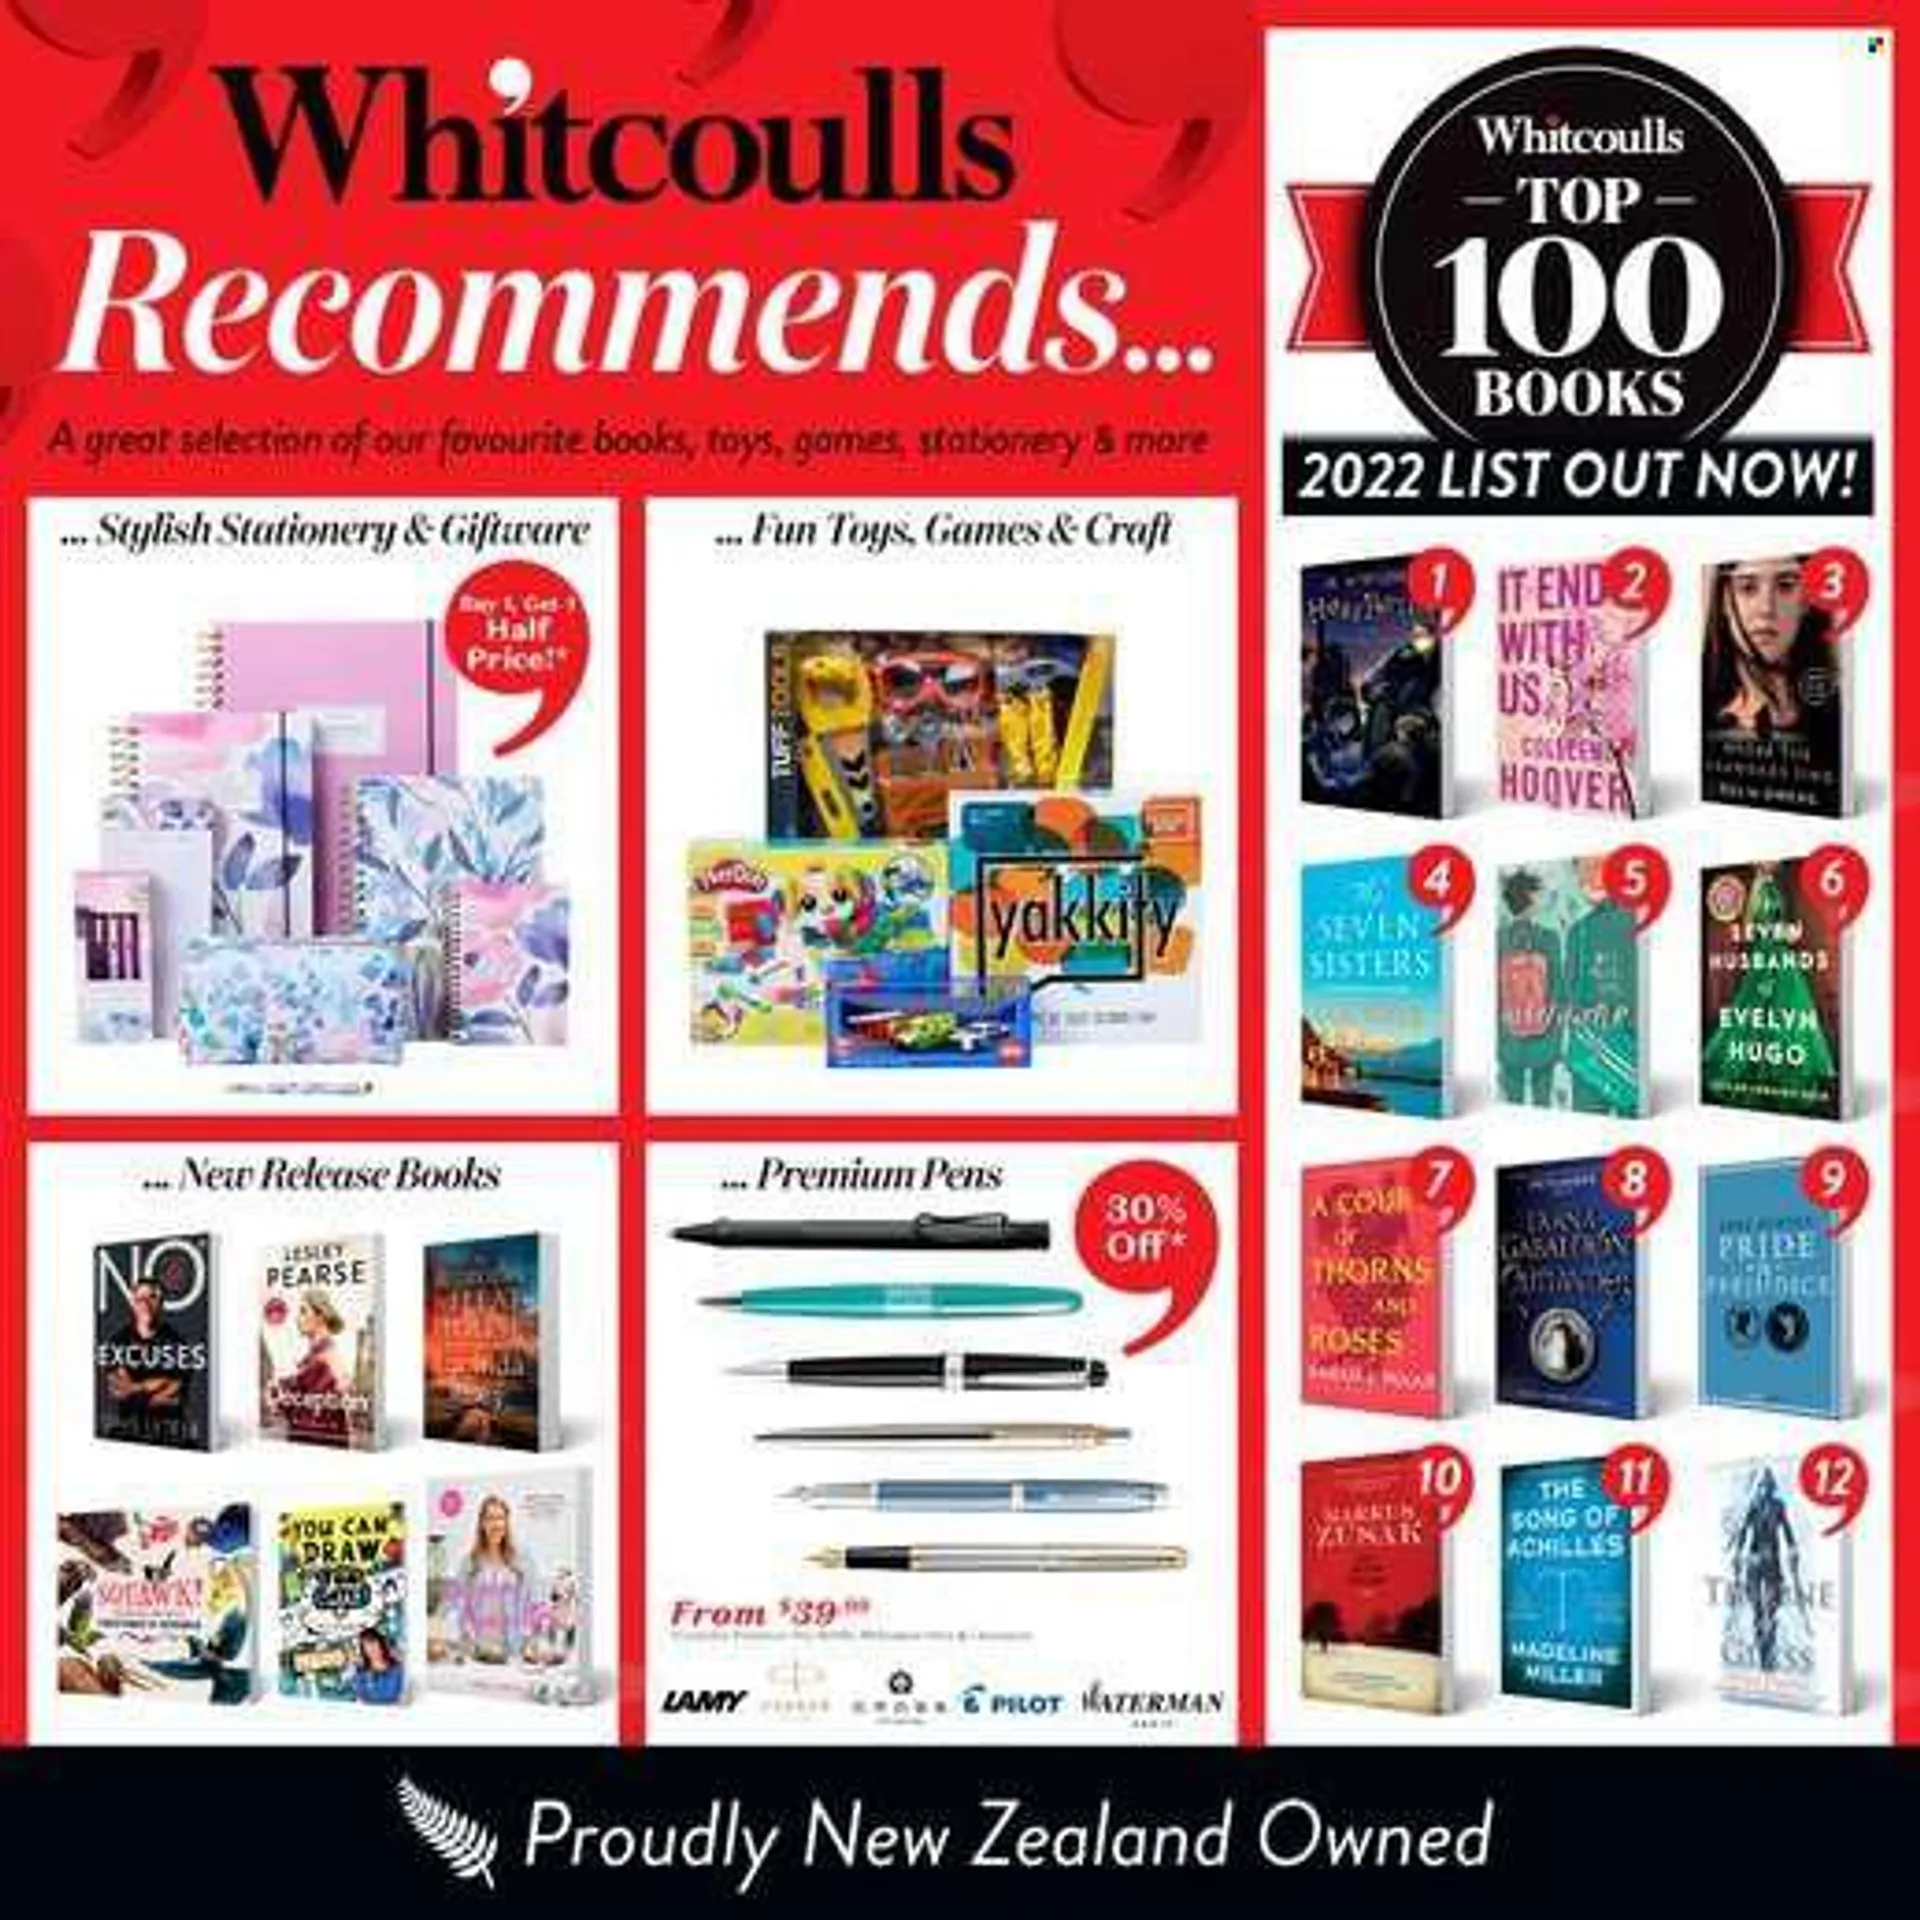 Whitcoulls mailer - 25.07.2022 - 21.08.2022 - Sales products - Pilot, book, toys. Page 1.